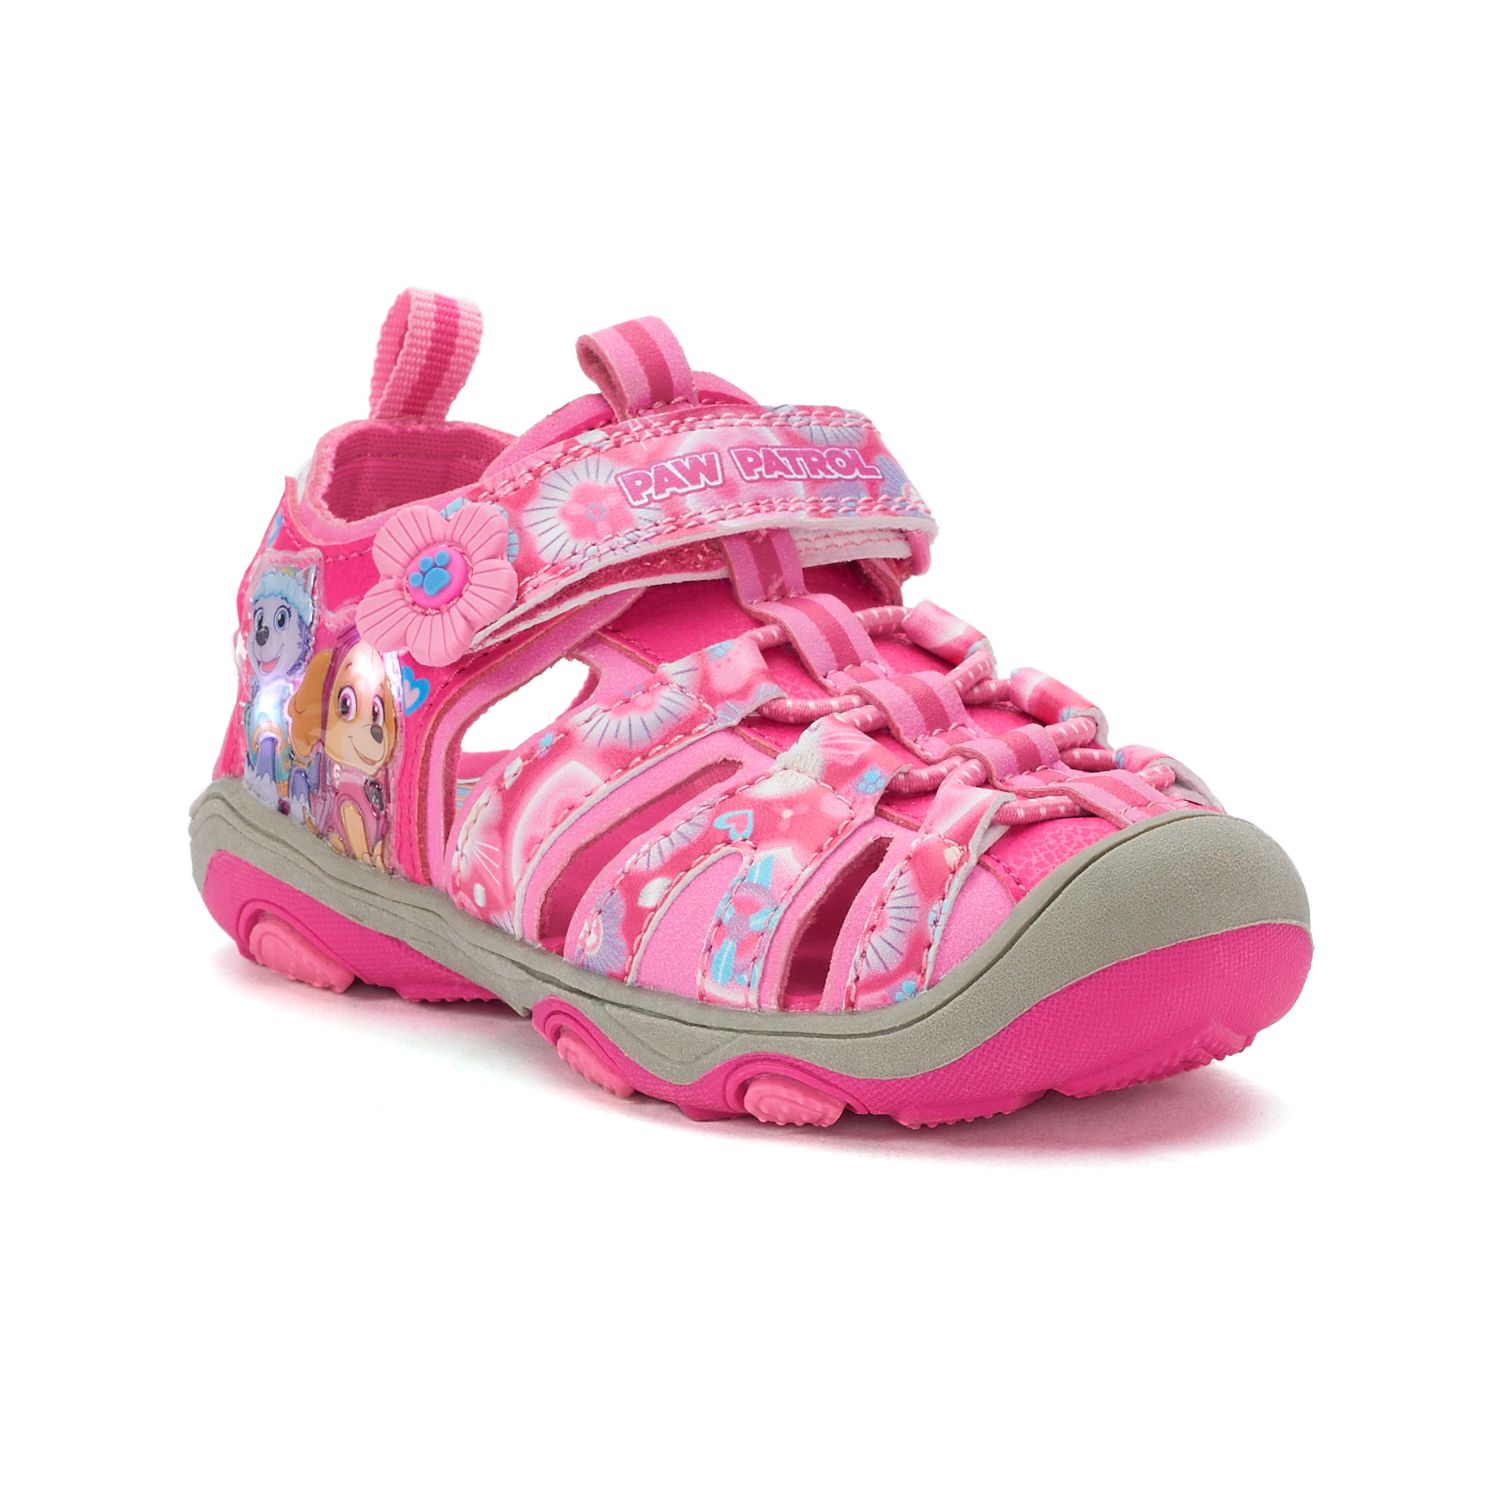 paw patrol light up pink shoes